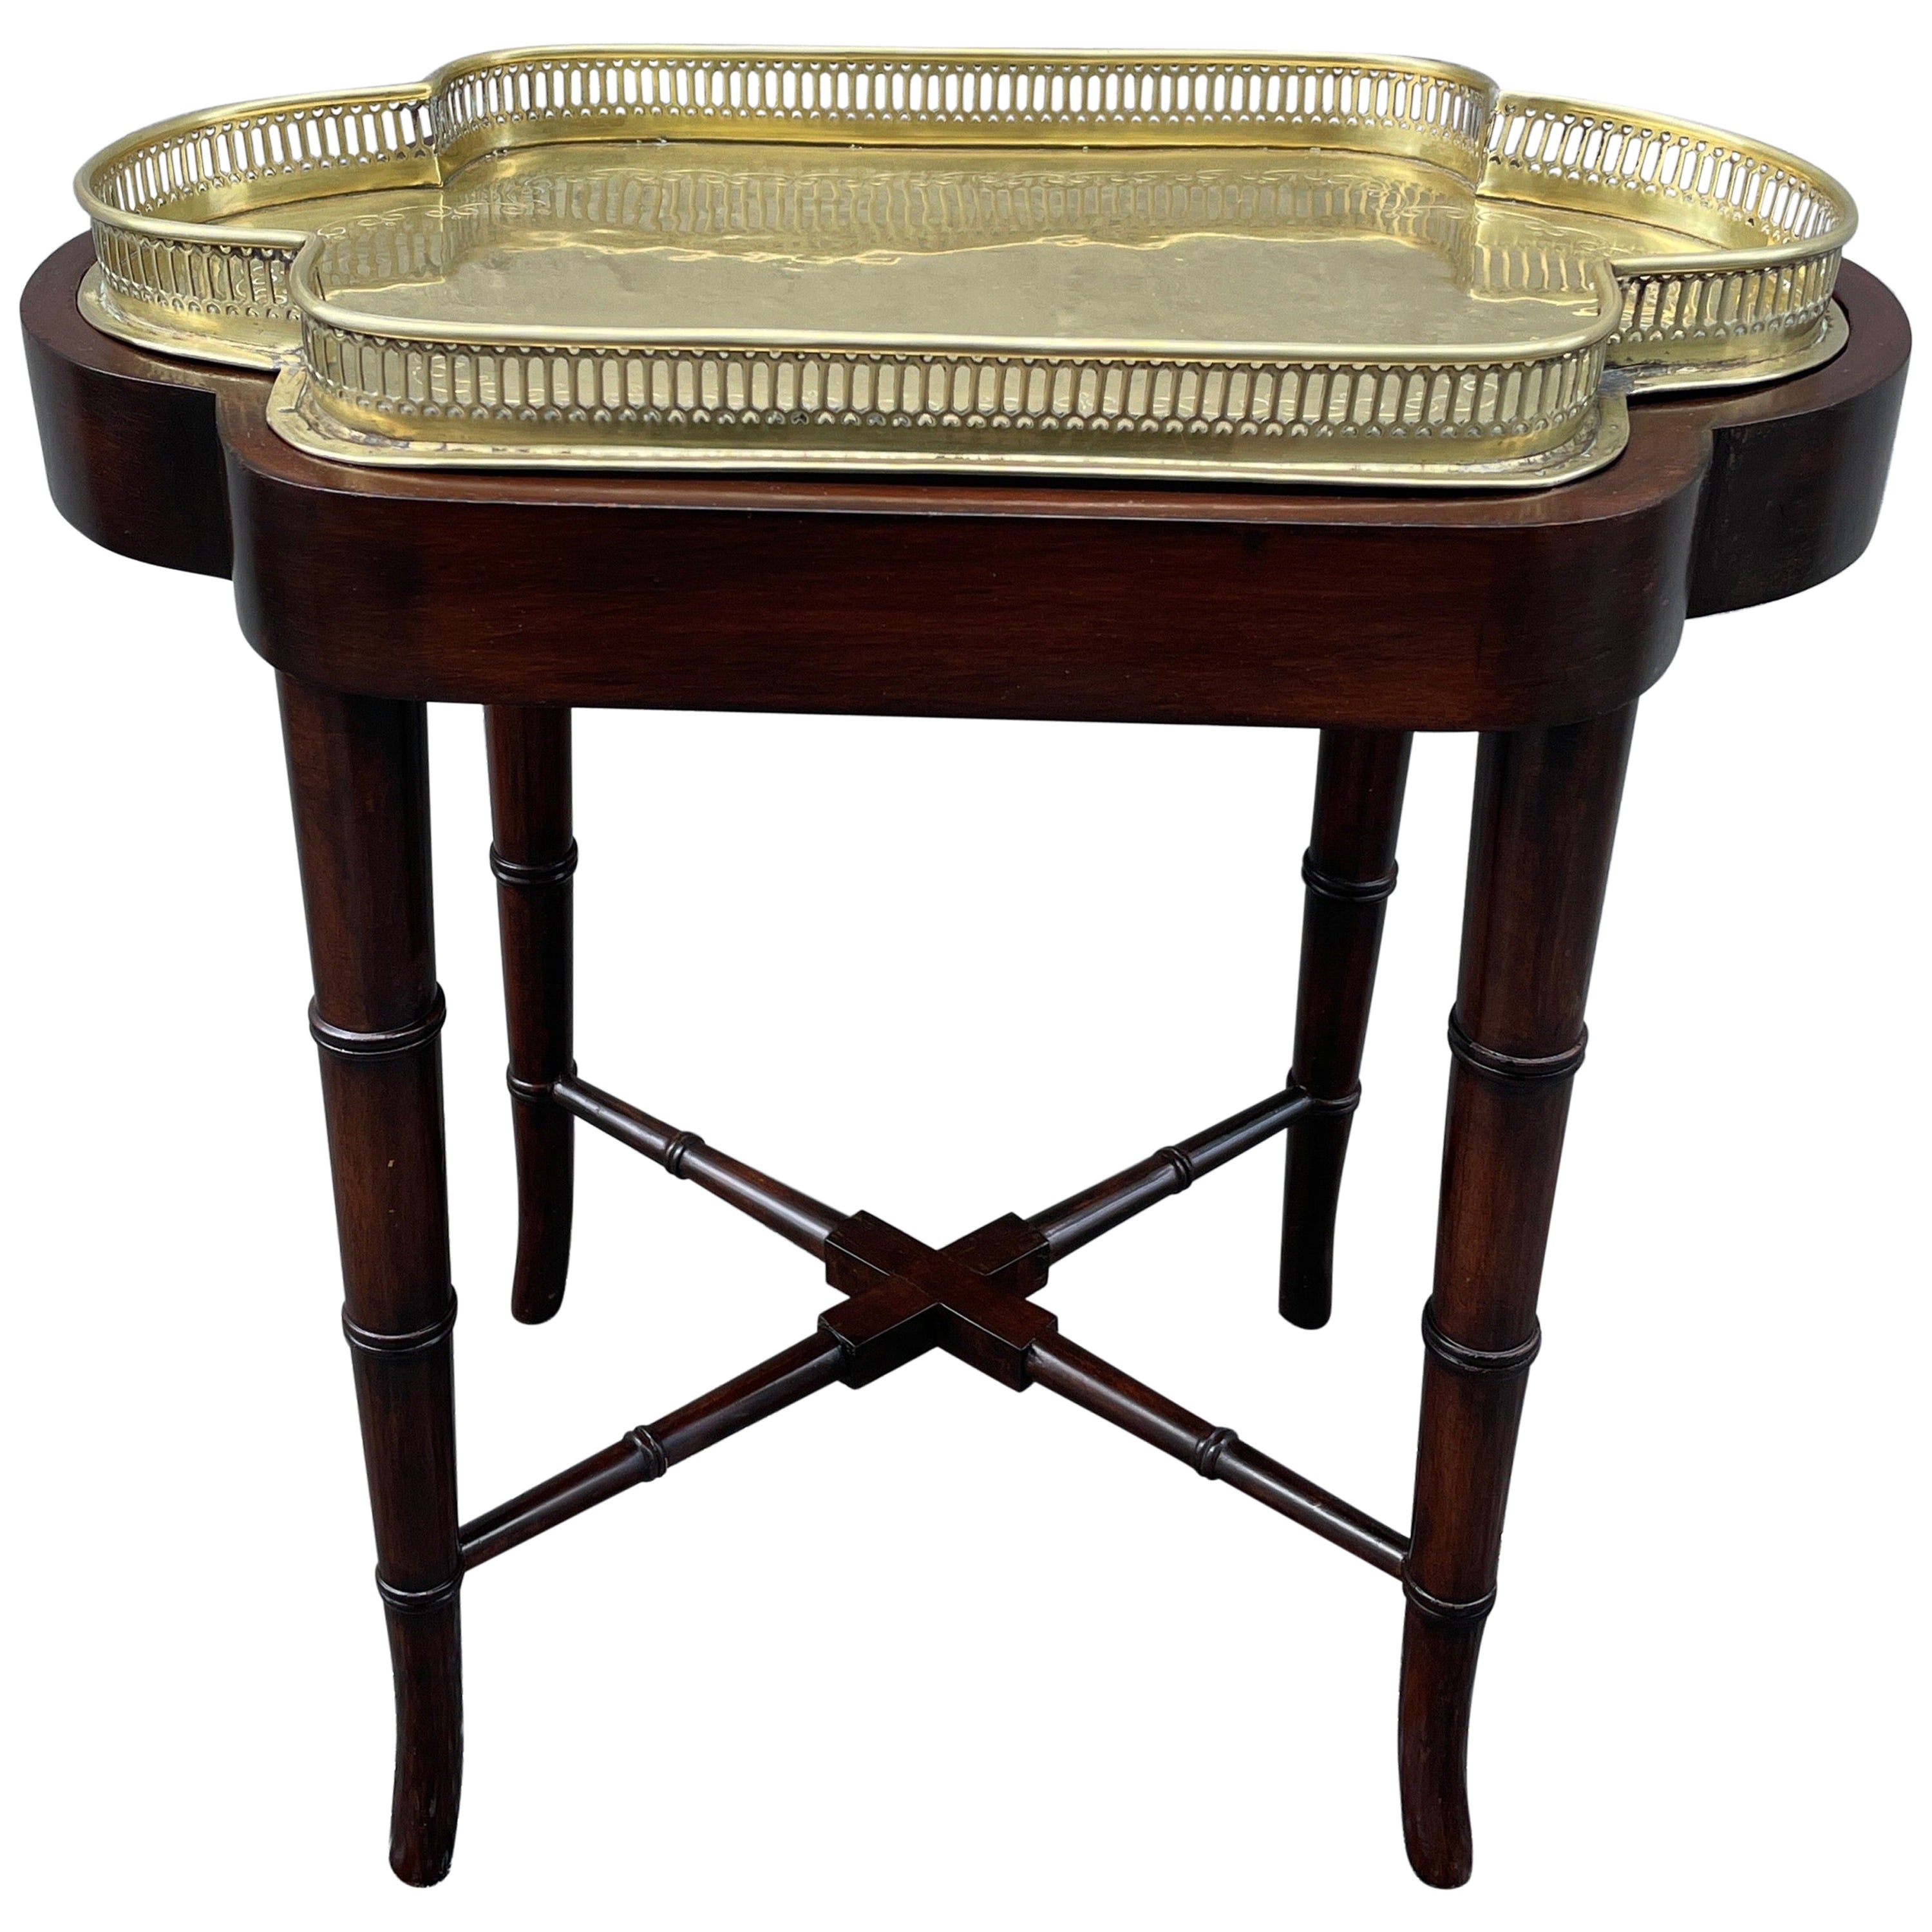 Antique Brass Galleried Tray Table